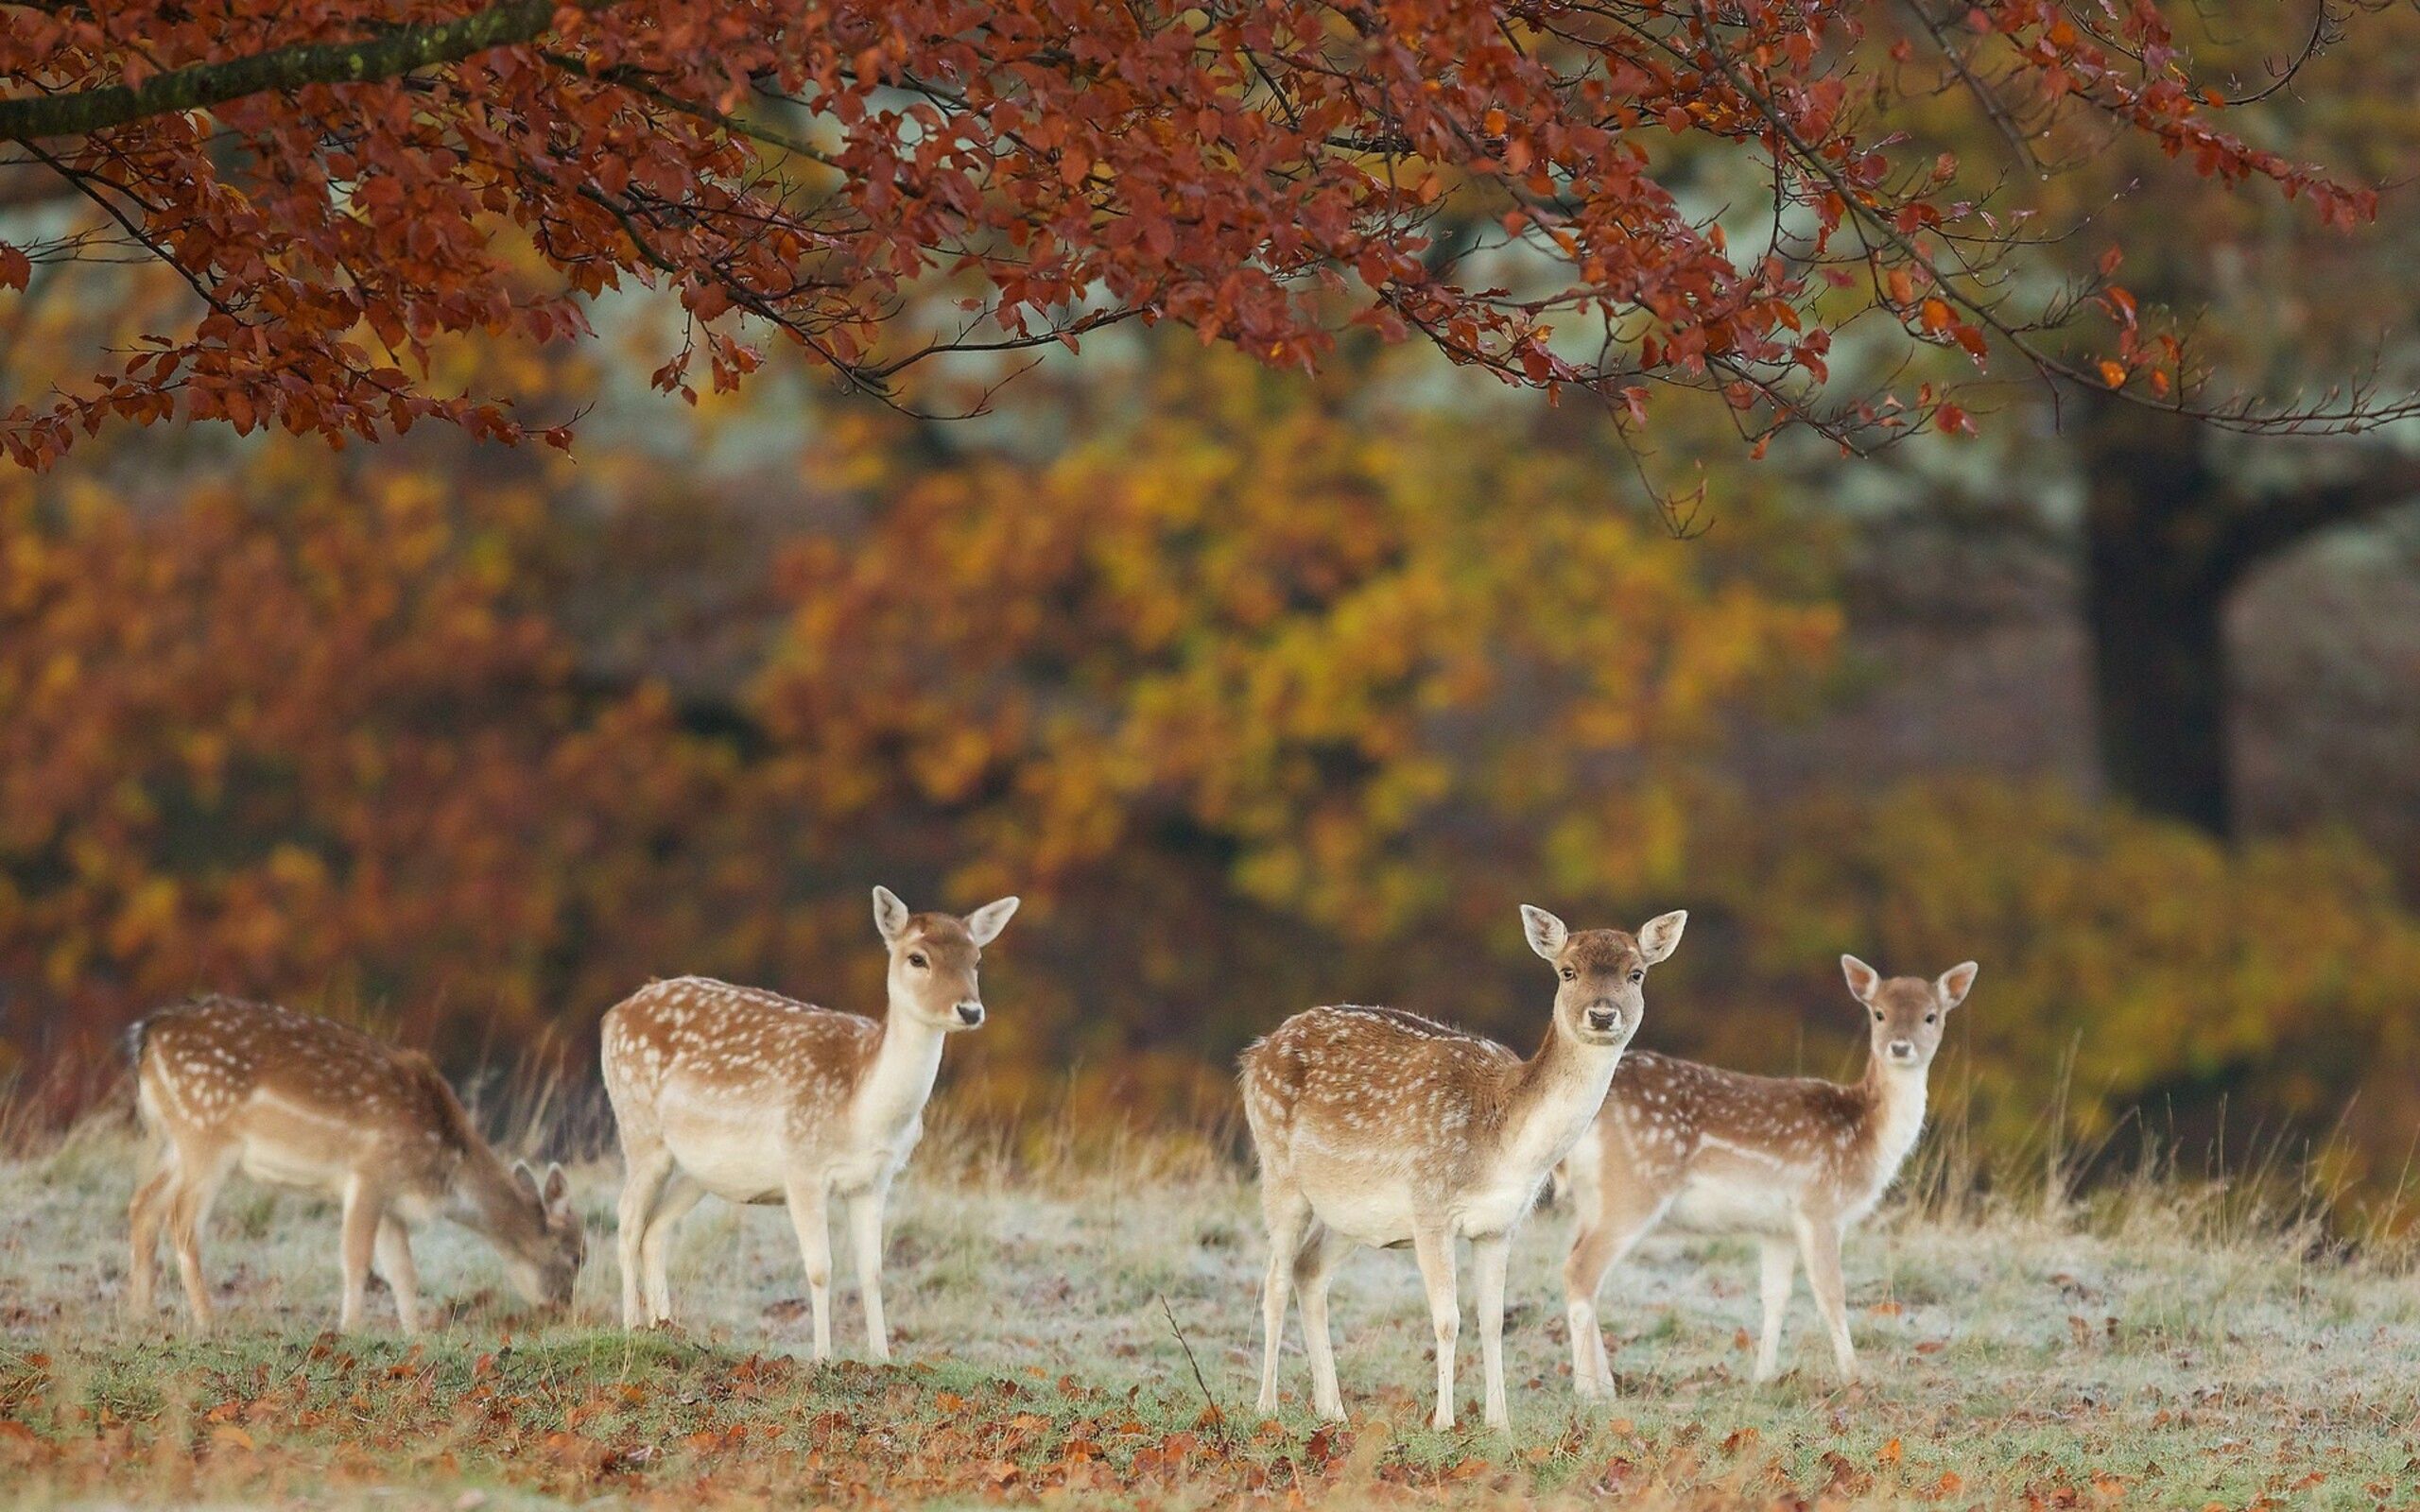 Four deers in the dry forest